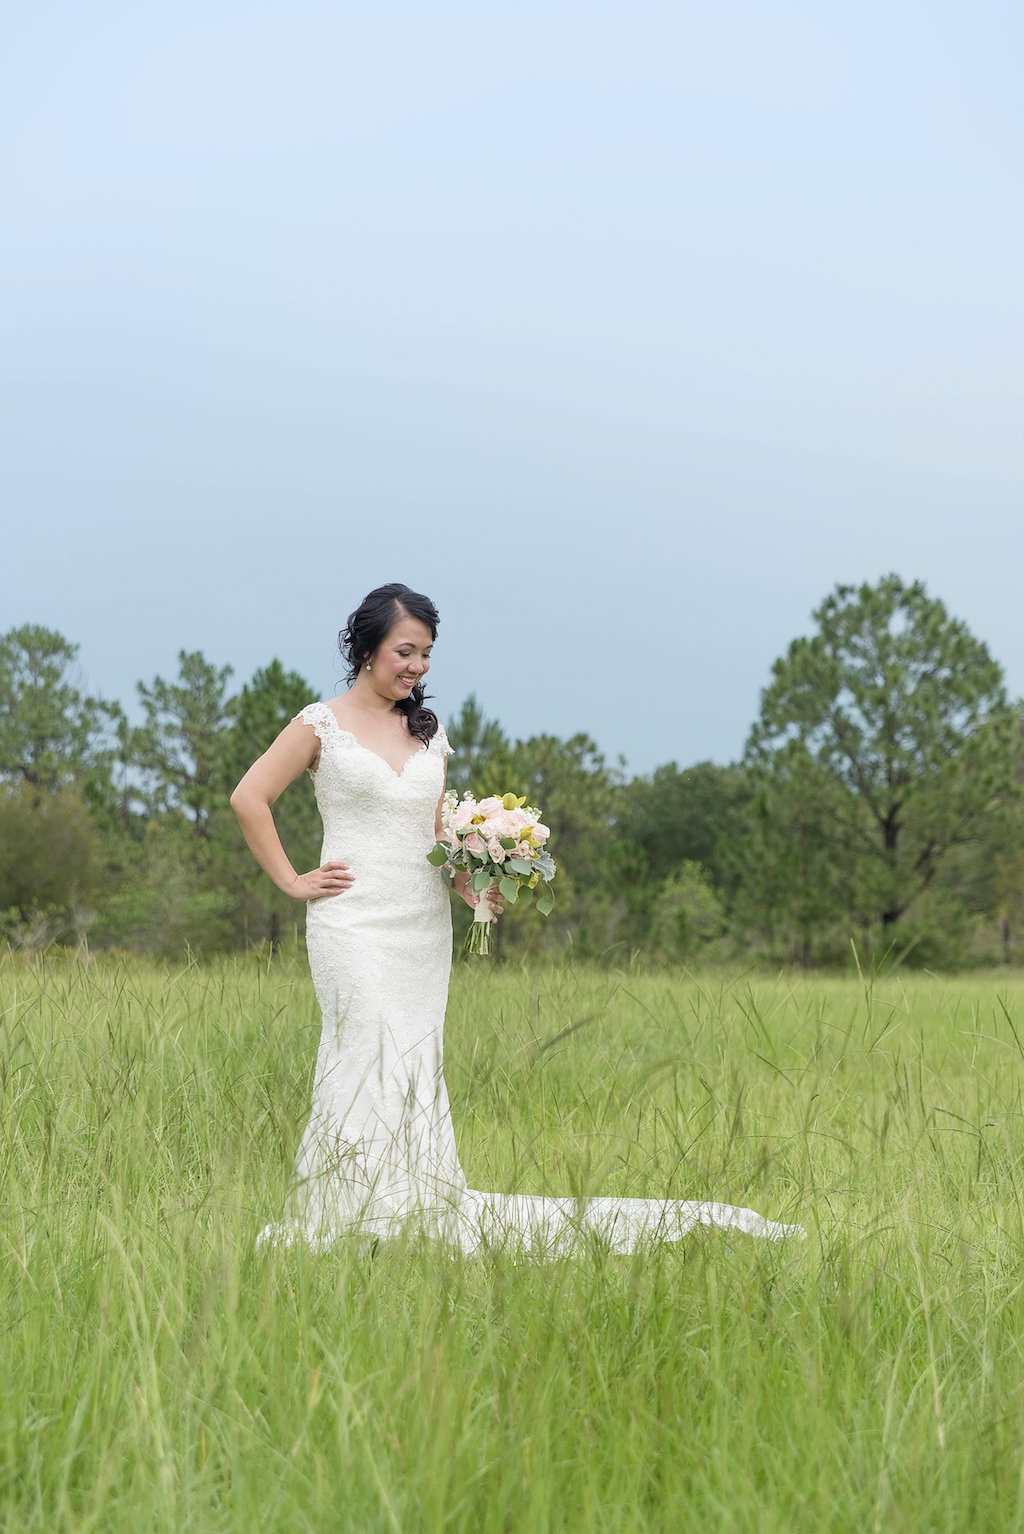 Outdoor Bridal Portrait with V Neck Stella York Wedding Dress and Yellow and White Bouquet with Greenery | Tampa Wedding Photographer Kristen Marie Photography